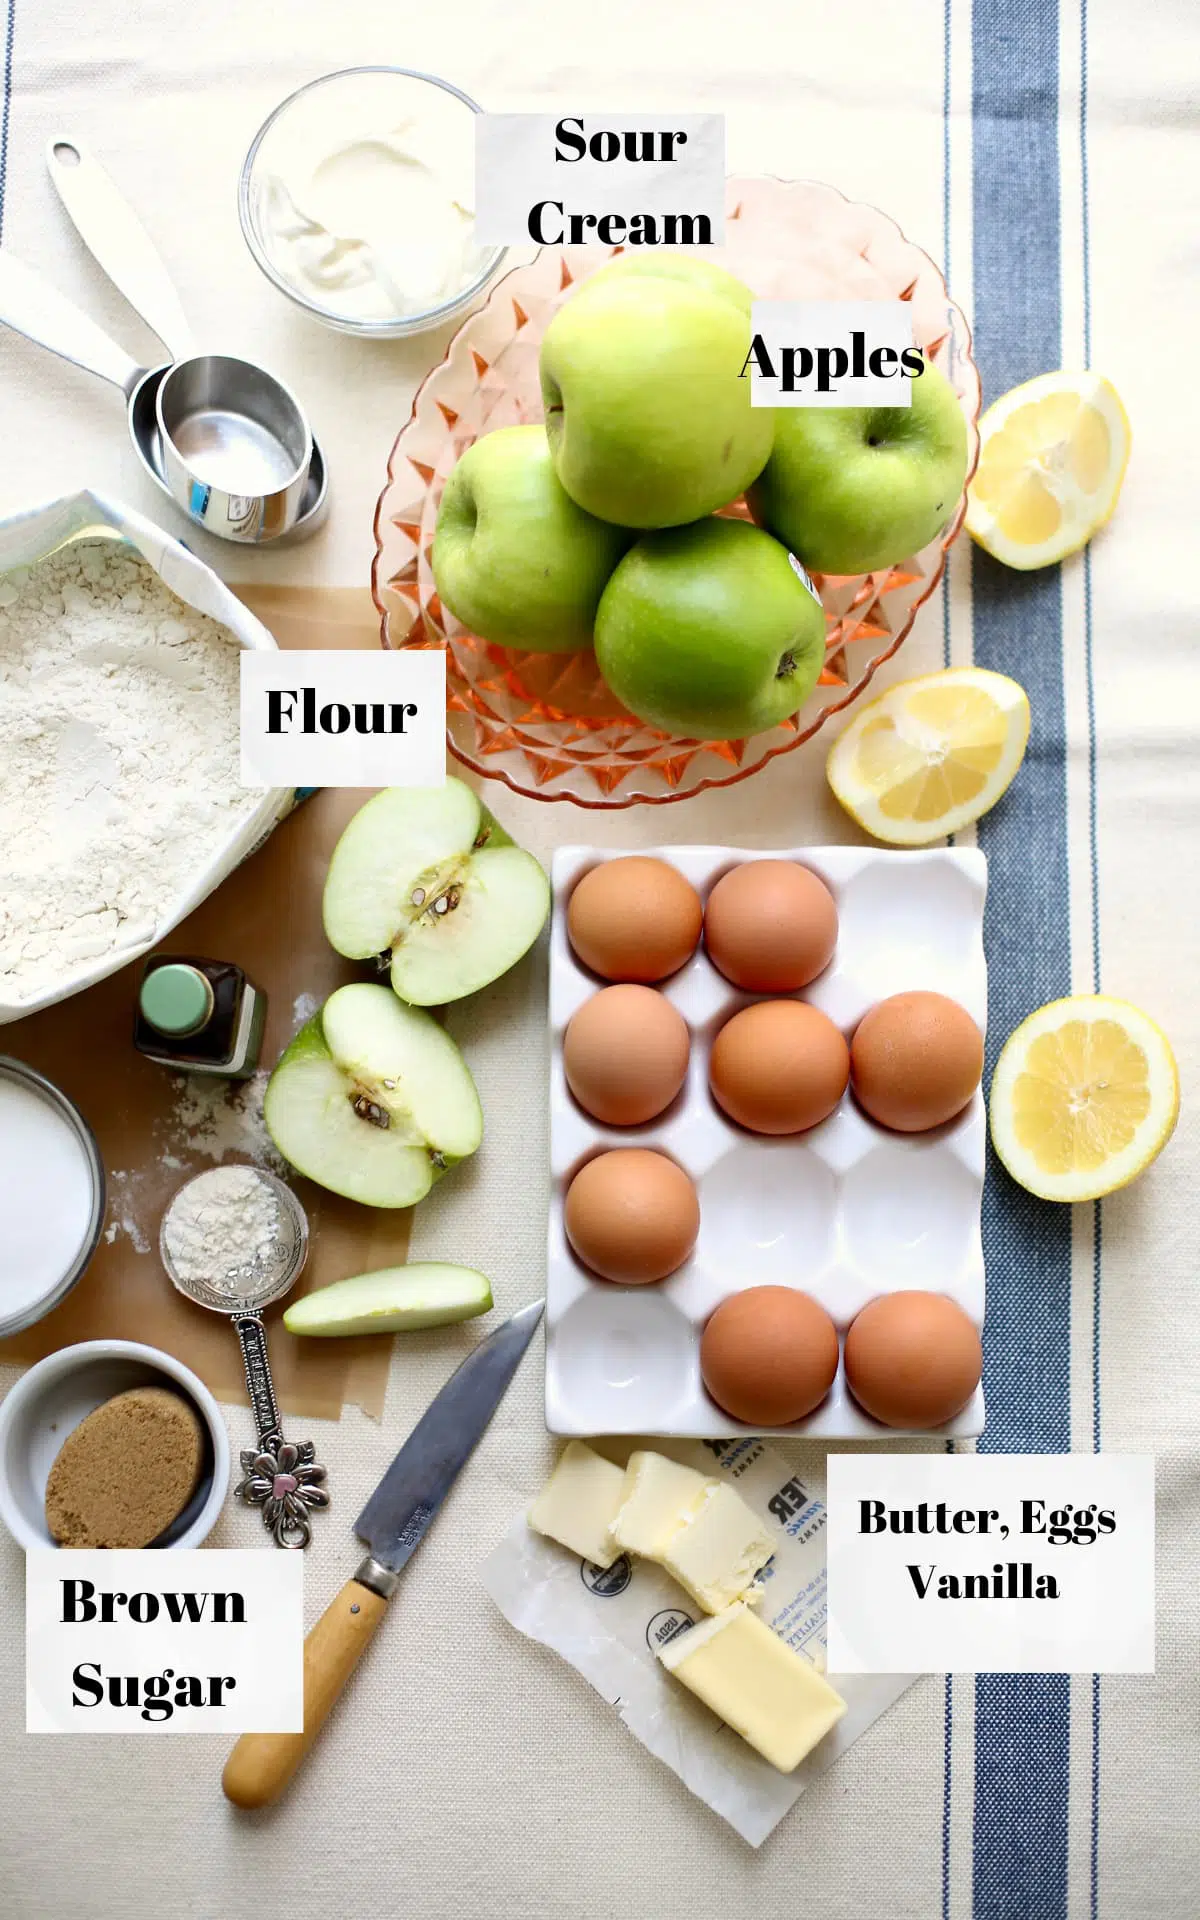 a photo of a table of ingredients for cake: apples, flour, eggs, butter, with a text overlay saying the names of the ingredients.